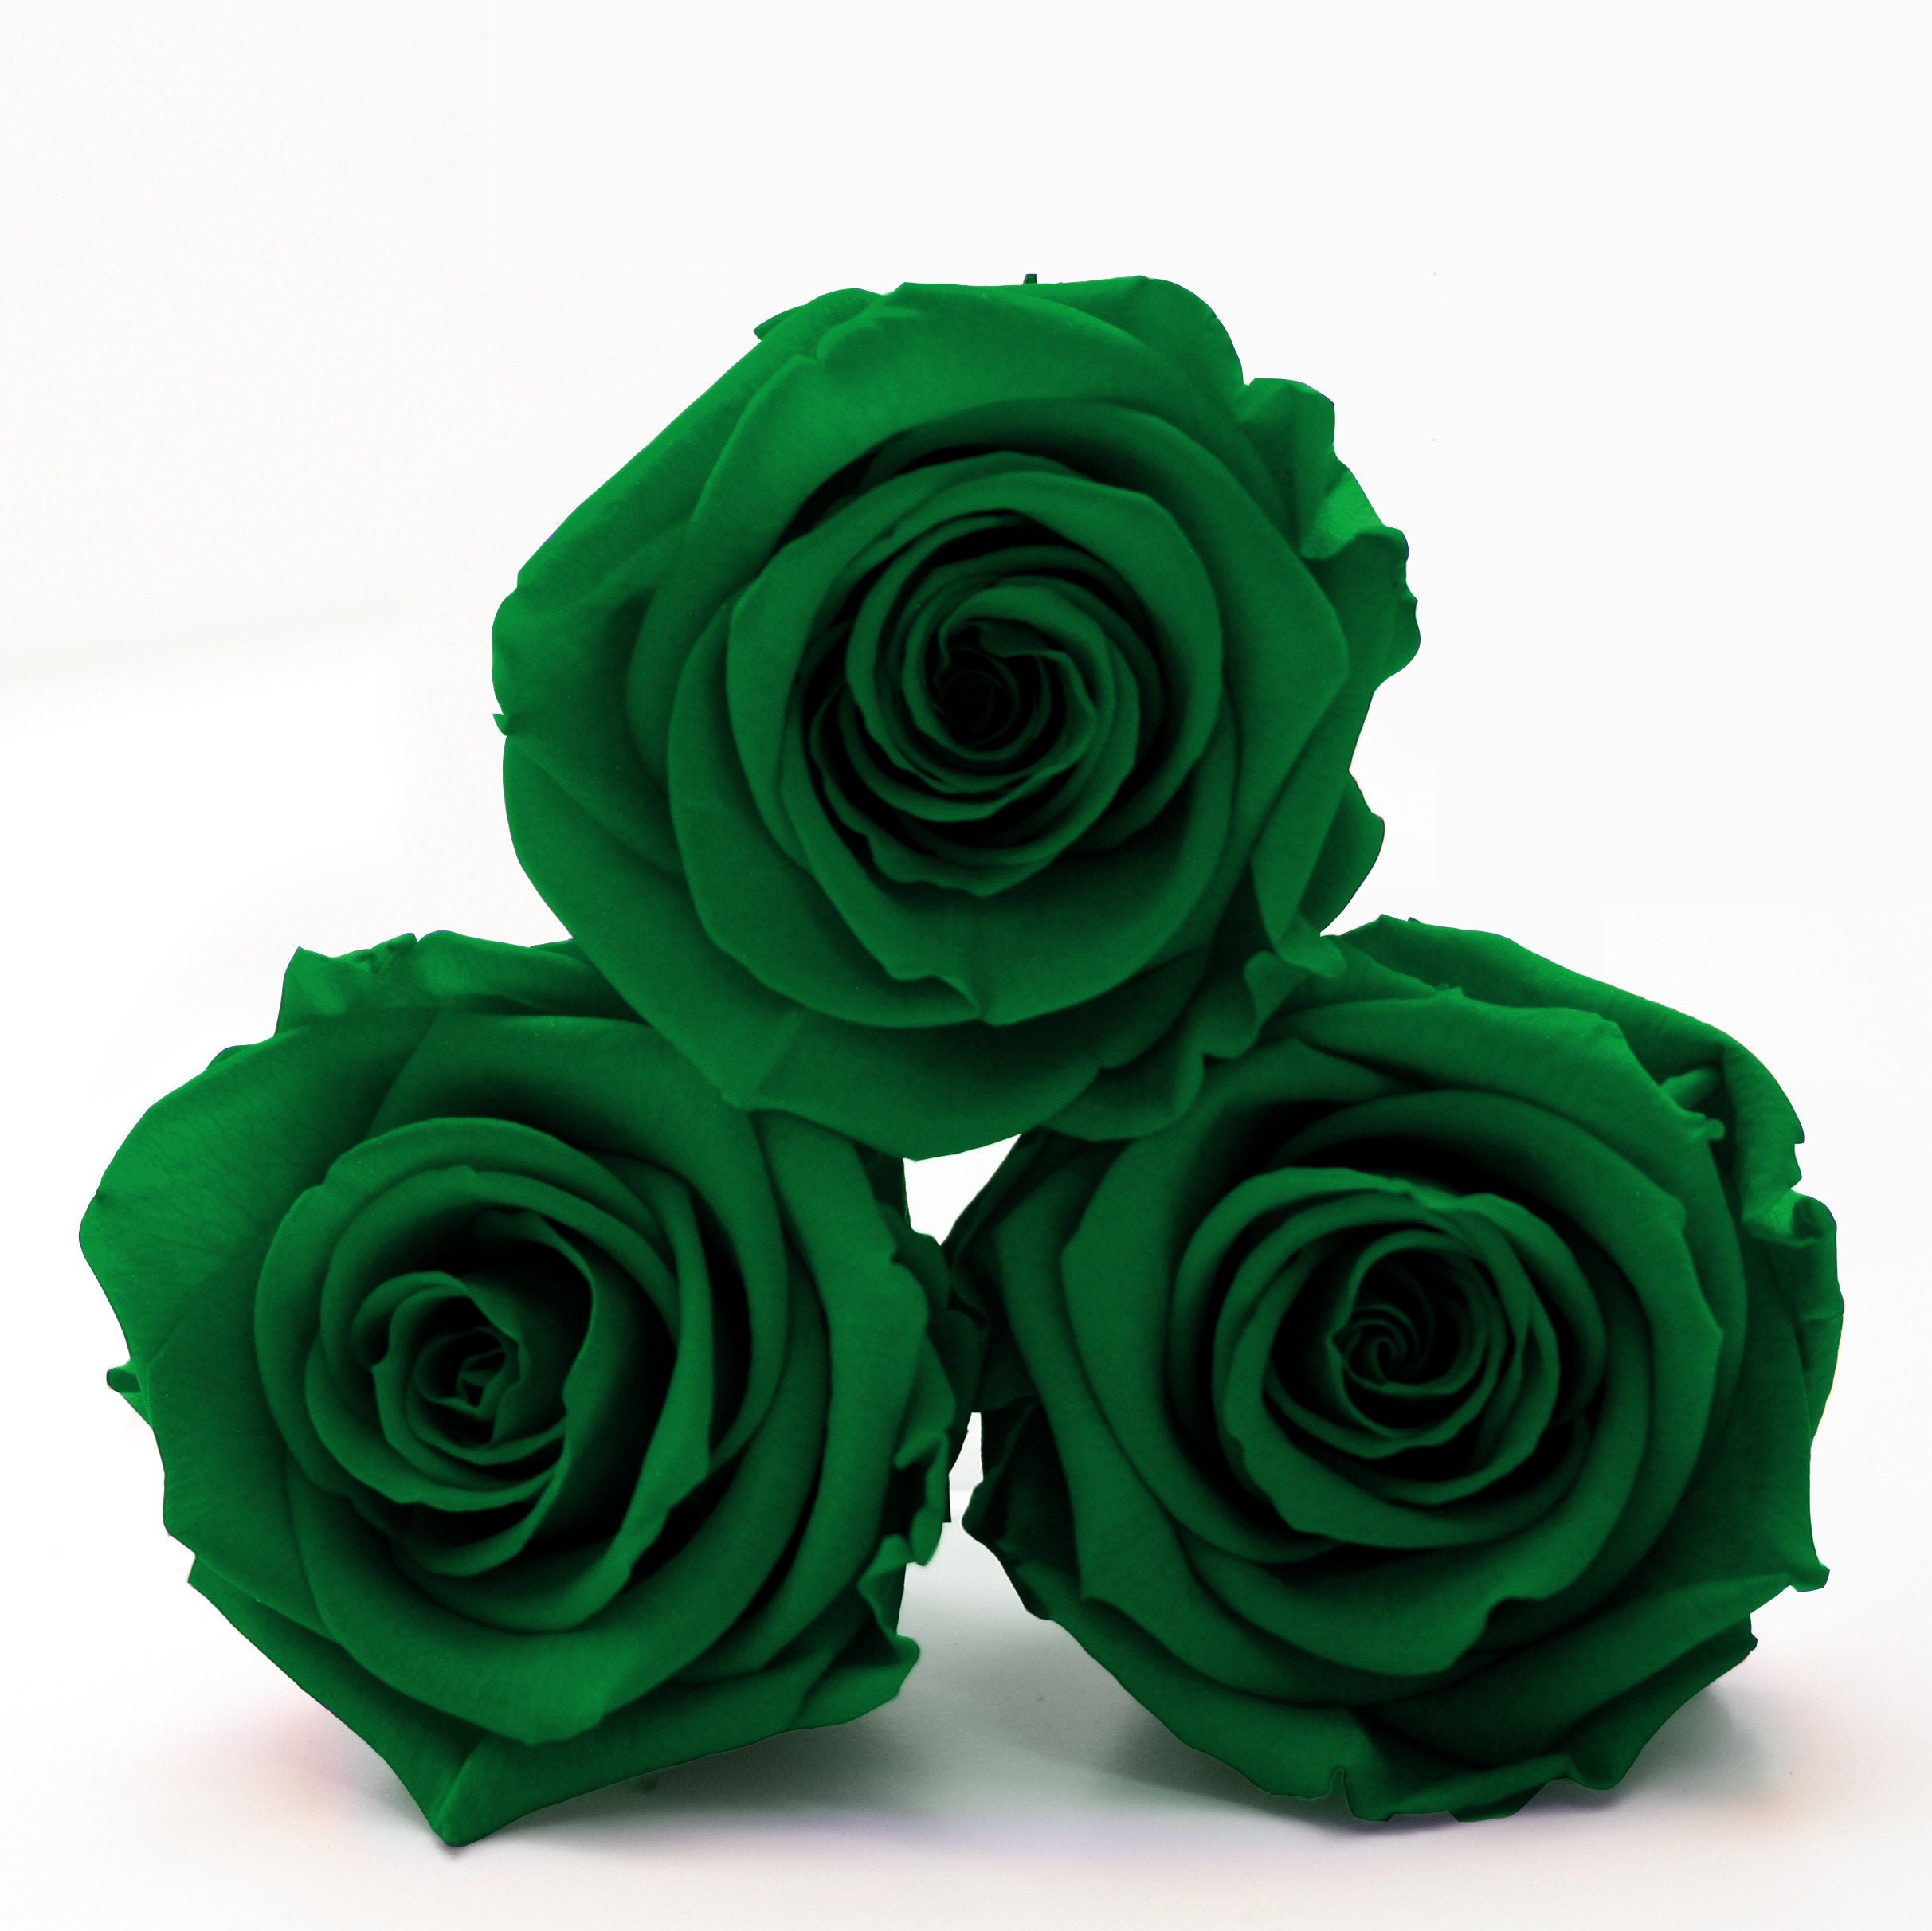 Green Infinity Roses that last a year Box of 6 rose heads. | Etsy